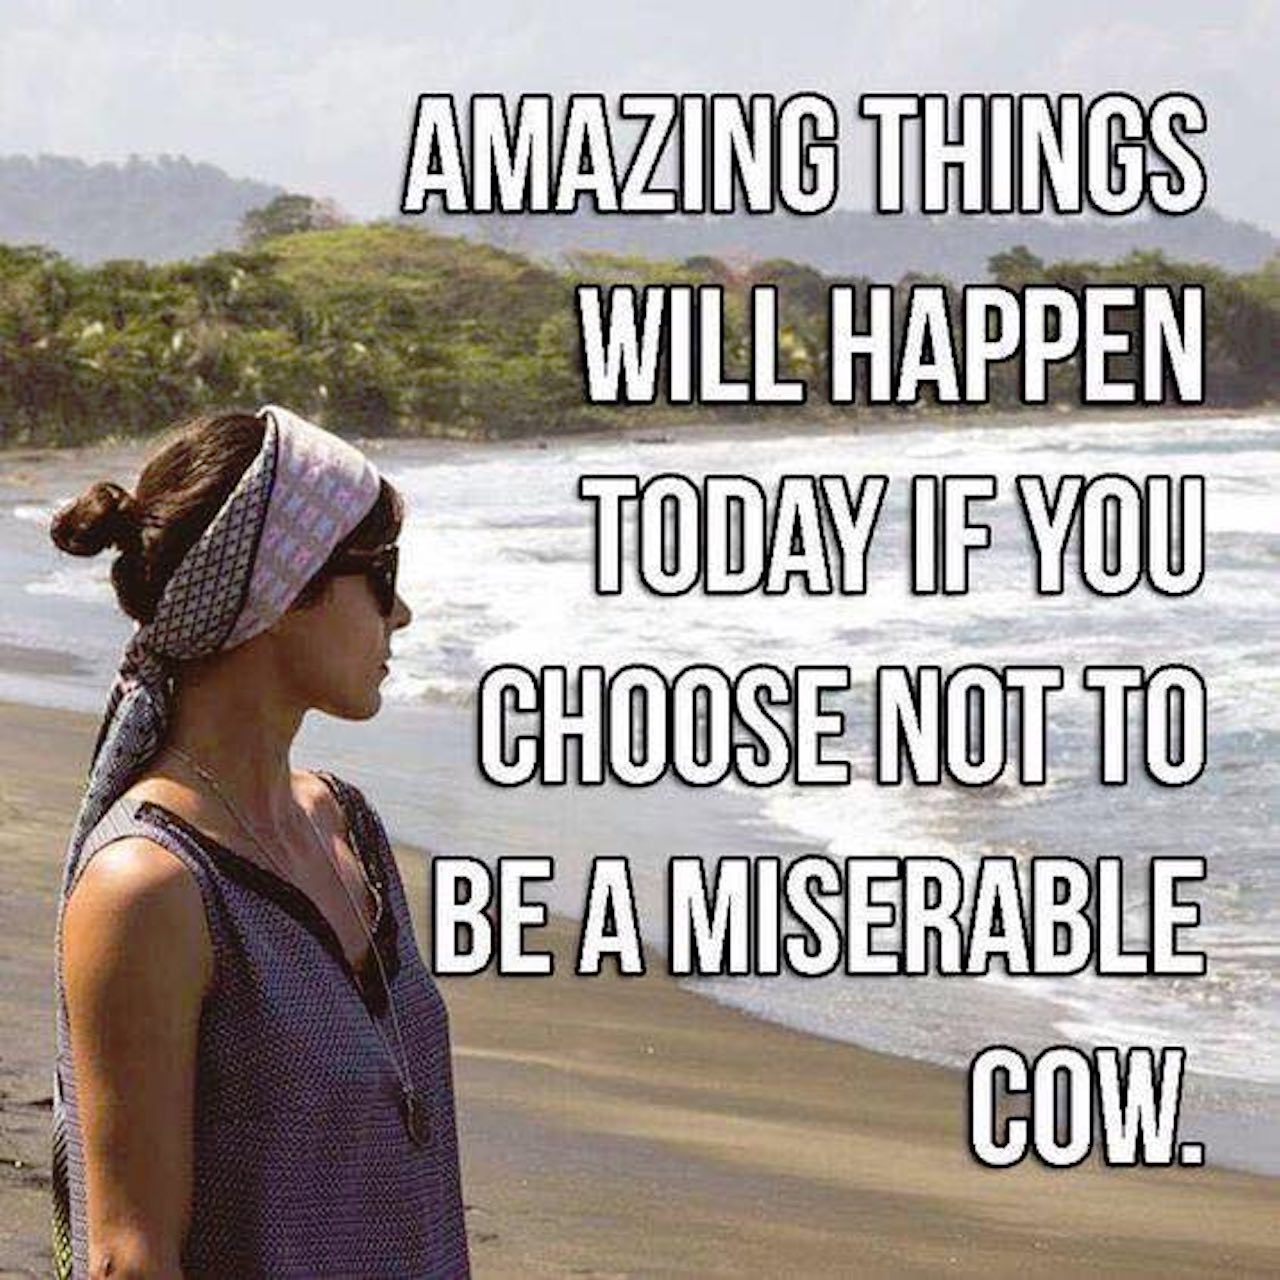 meme that says 'amazing things will happen today if you choose not to be a miserable cow'